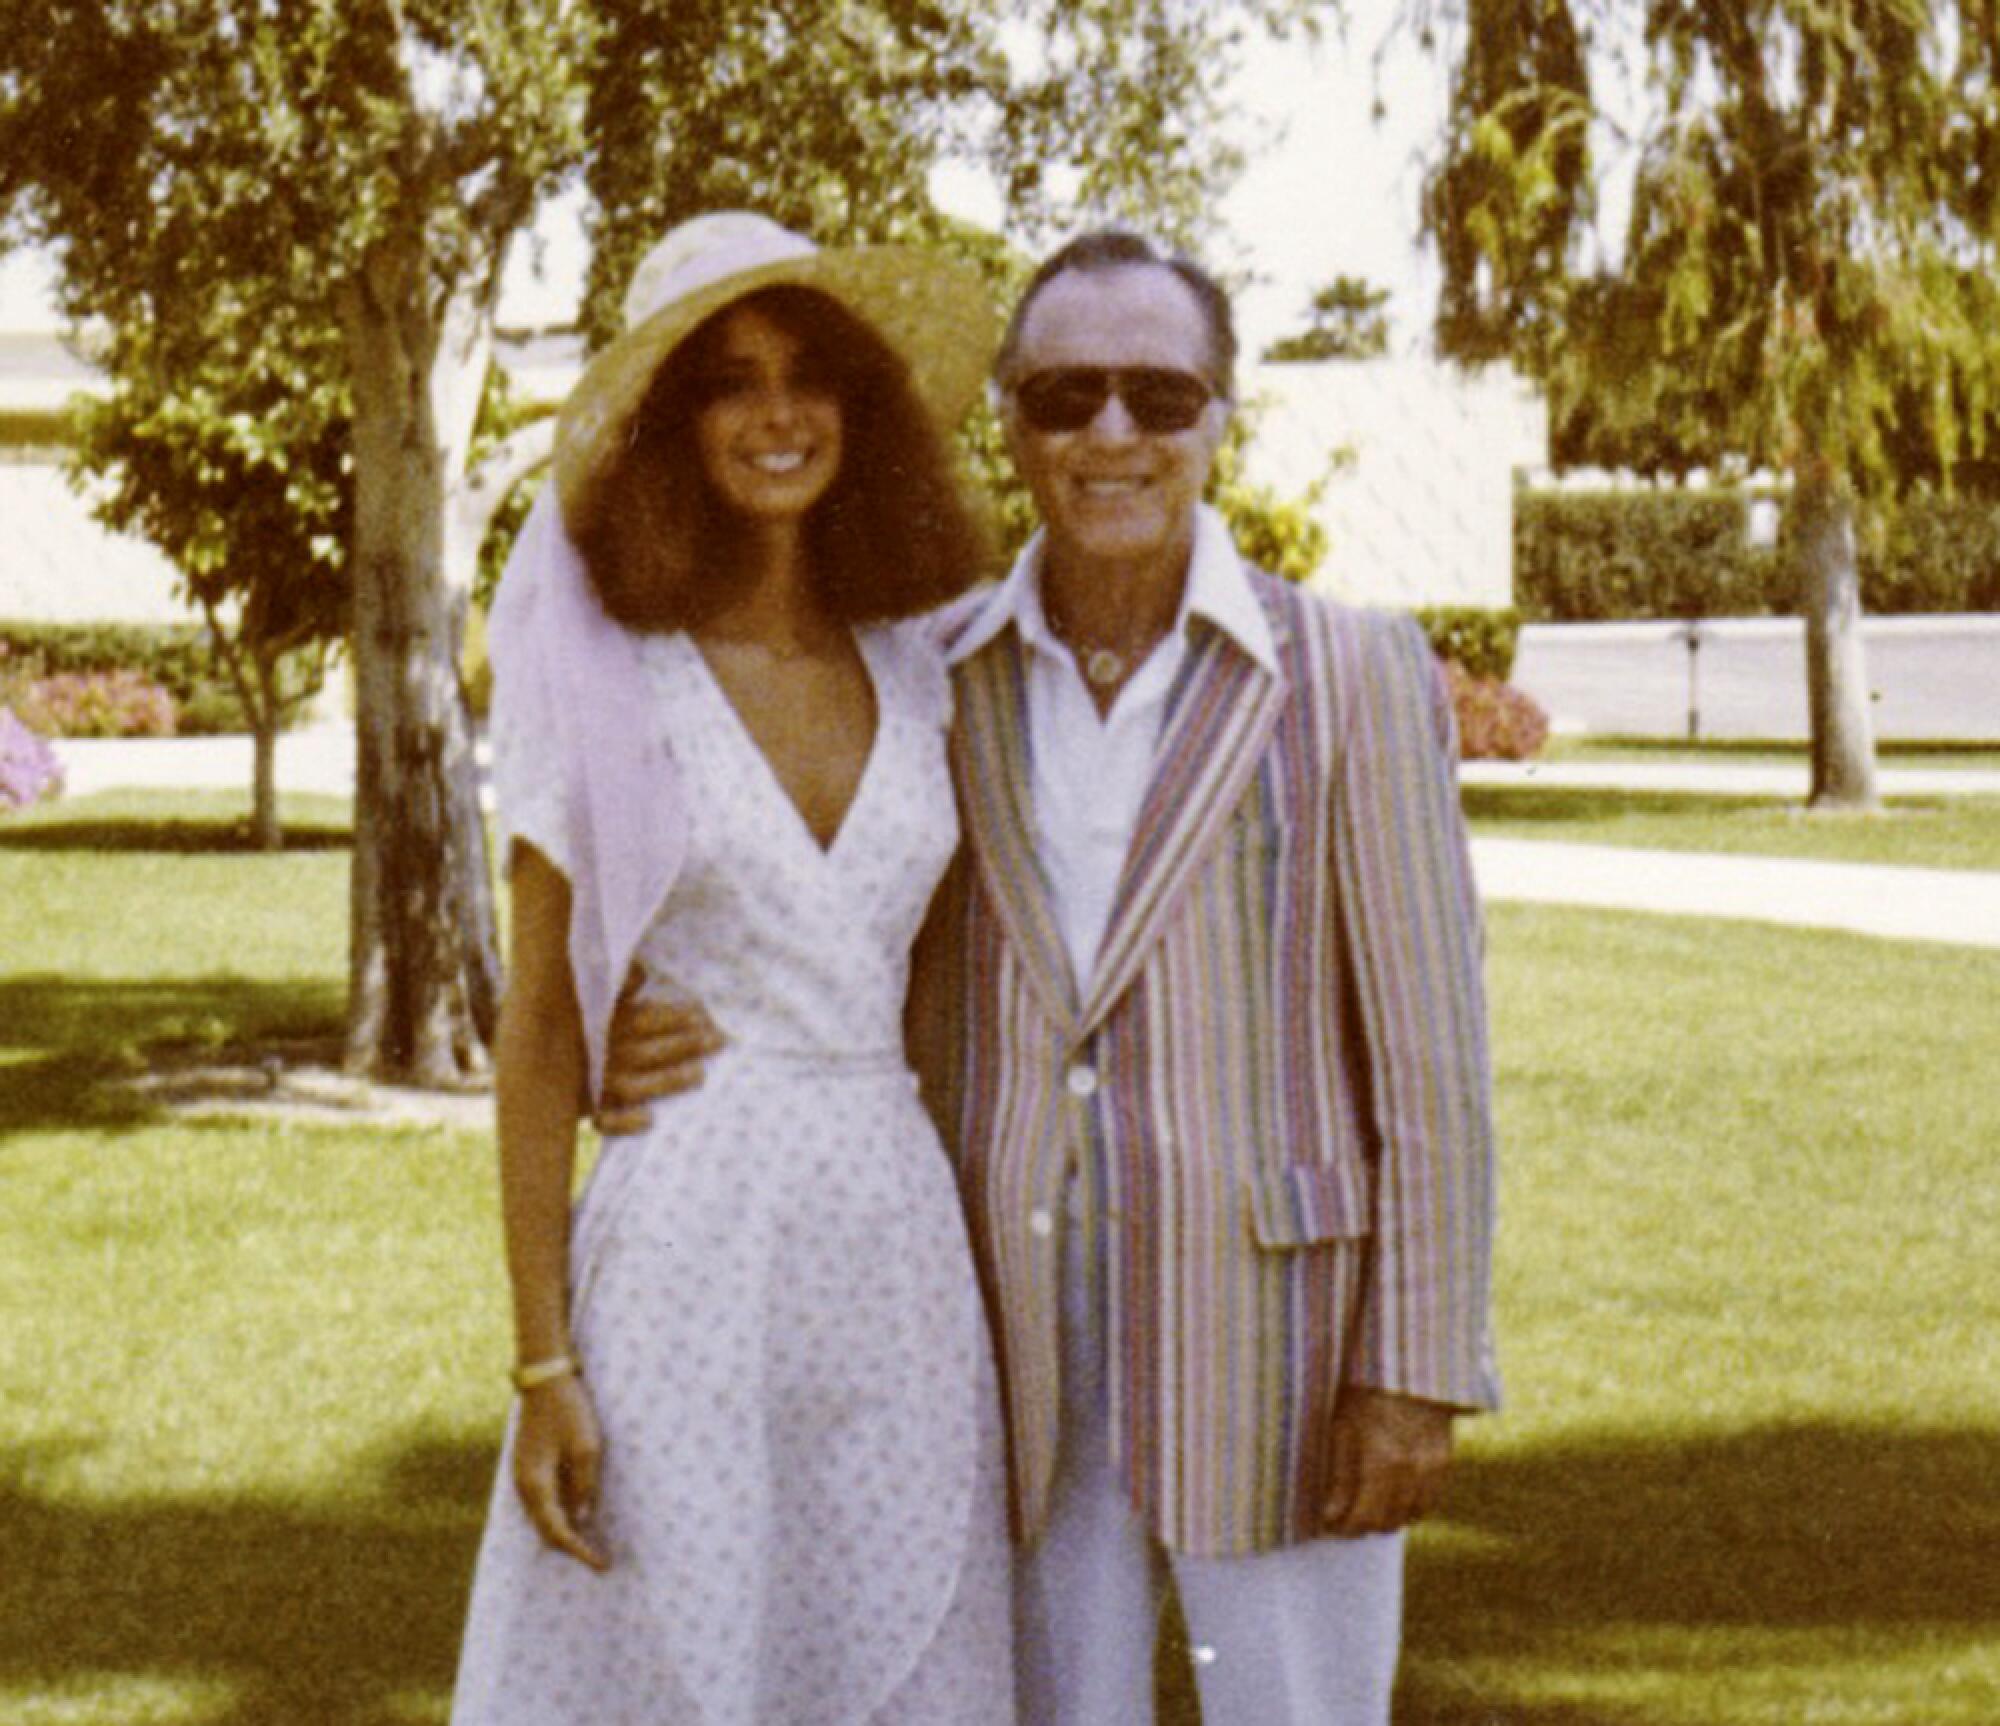 A photo of a man and a woman dressed up outdoors 